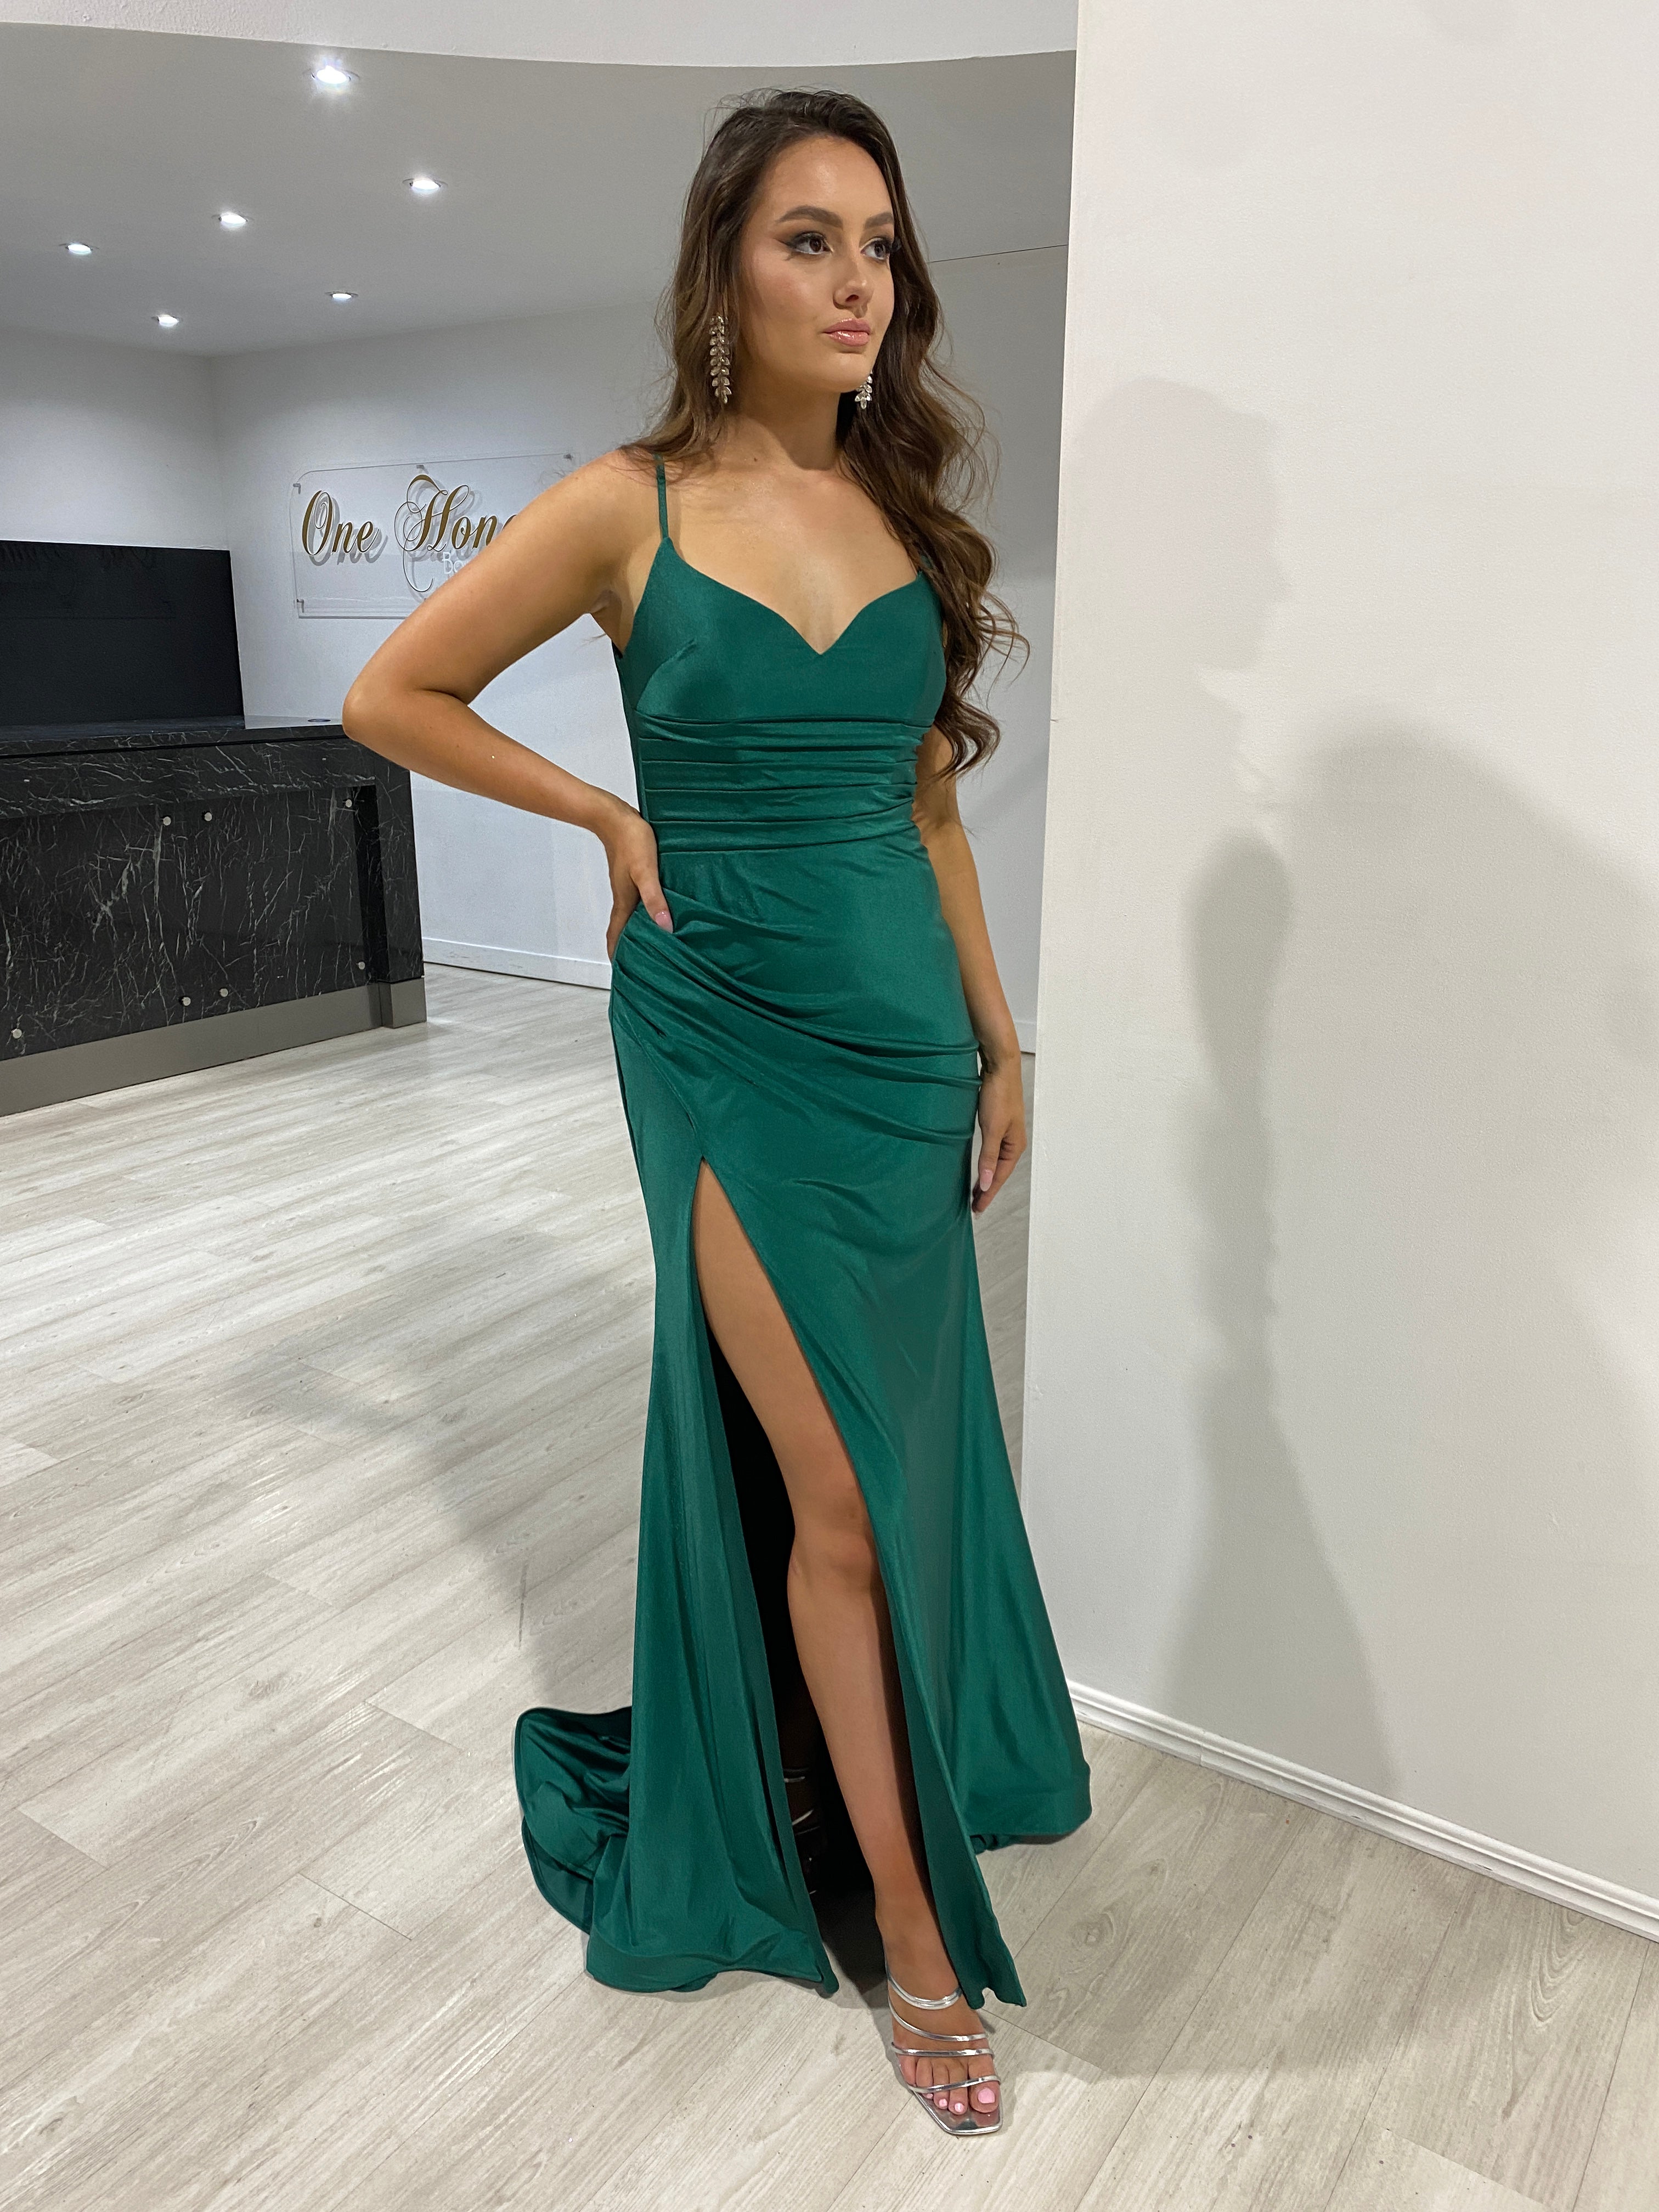 Honey Couture TARA Emerald Silky Ruched Bodice Mermaid Formal Gown